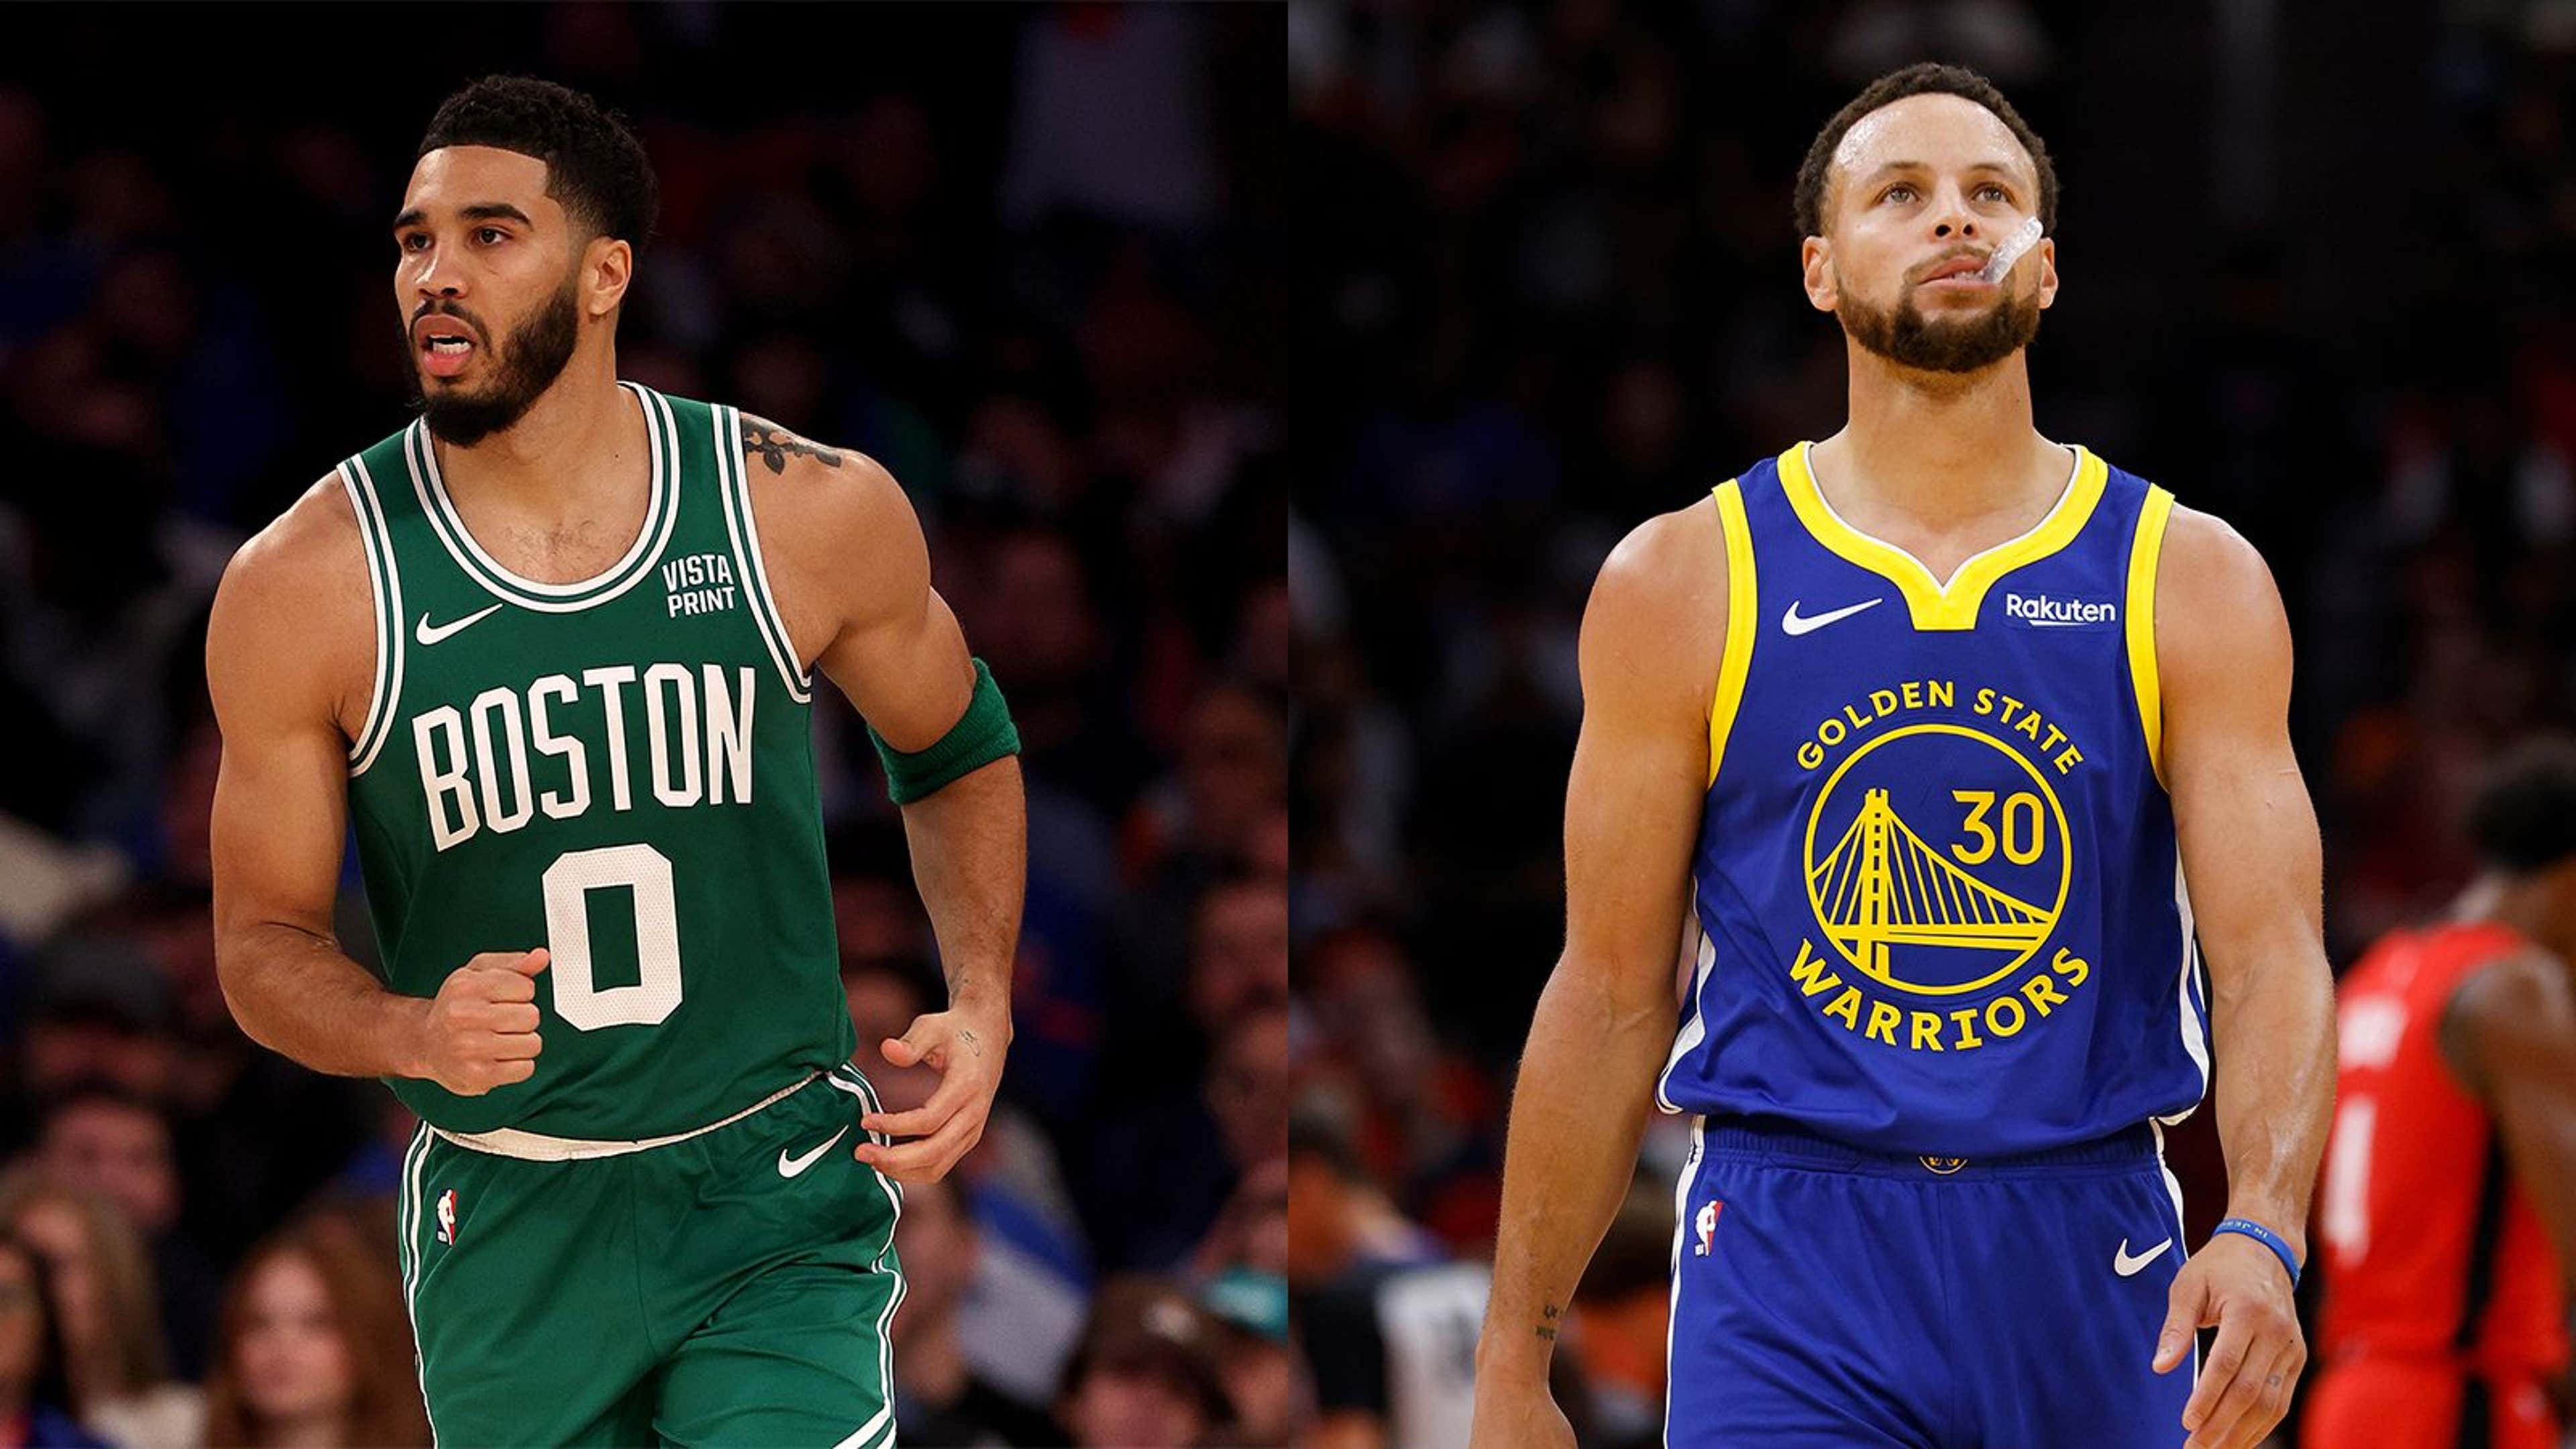 How to watch Golden State Warriors vs Boston Celtics NBA game: Live stream,  TV channel, kickoff, stats & everything you need to know